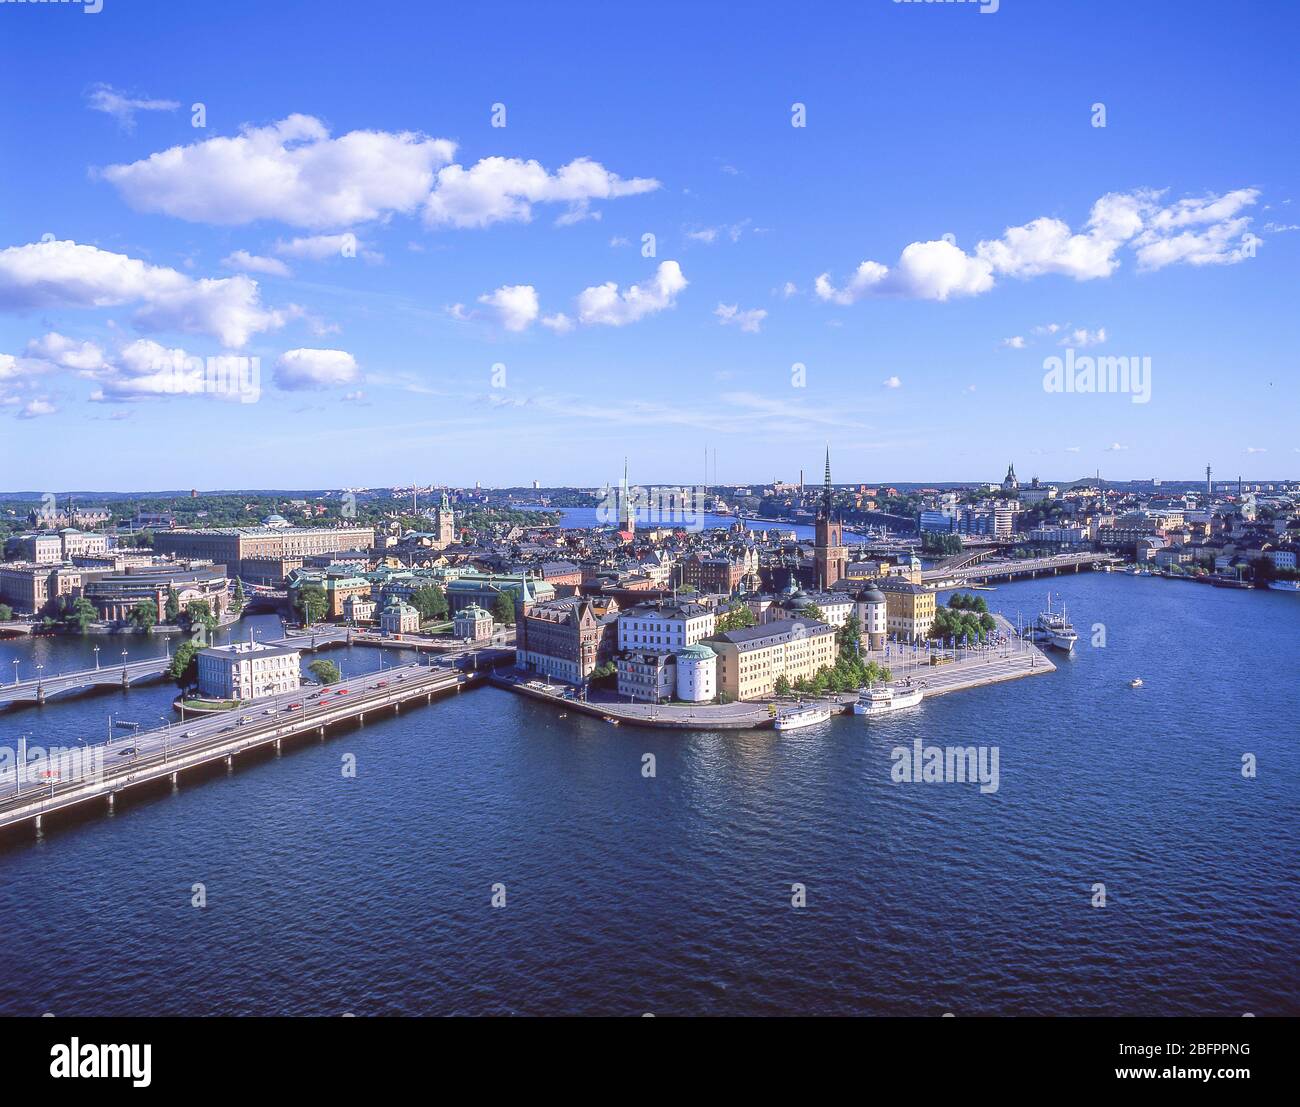 Aerial view of Gamla Stan (Old Town) from City Hall, Stadsholmen, Stockholm, Kingdom of Sweden Stock Photo